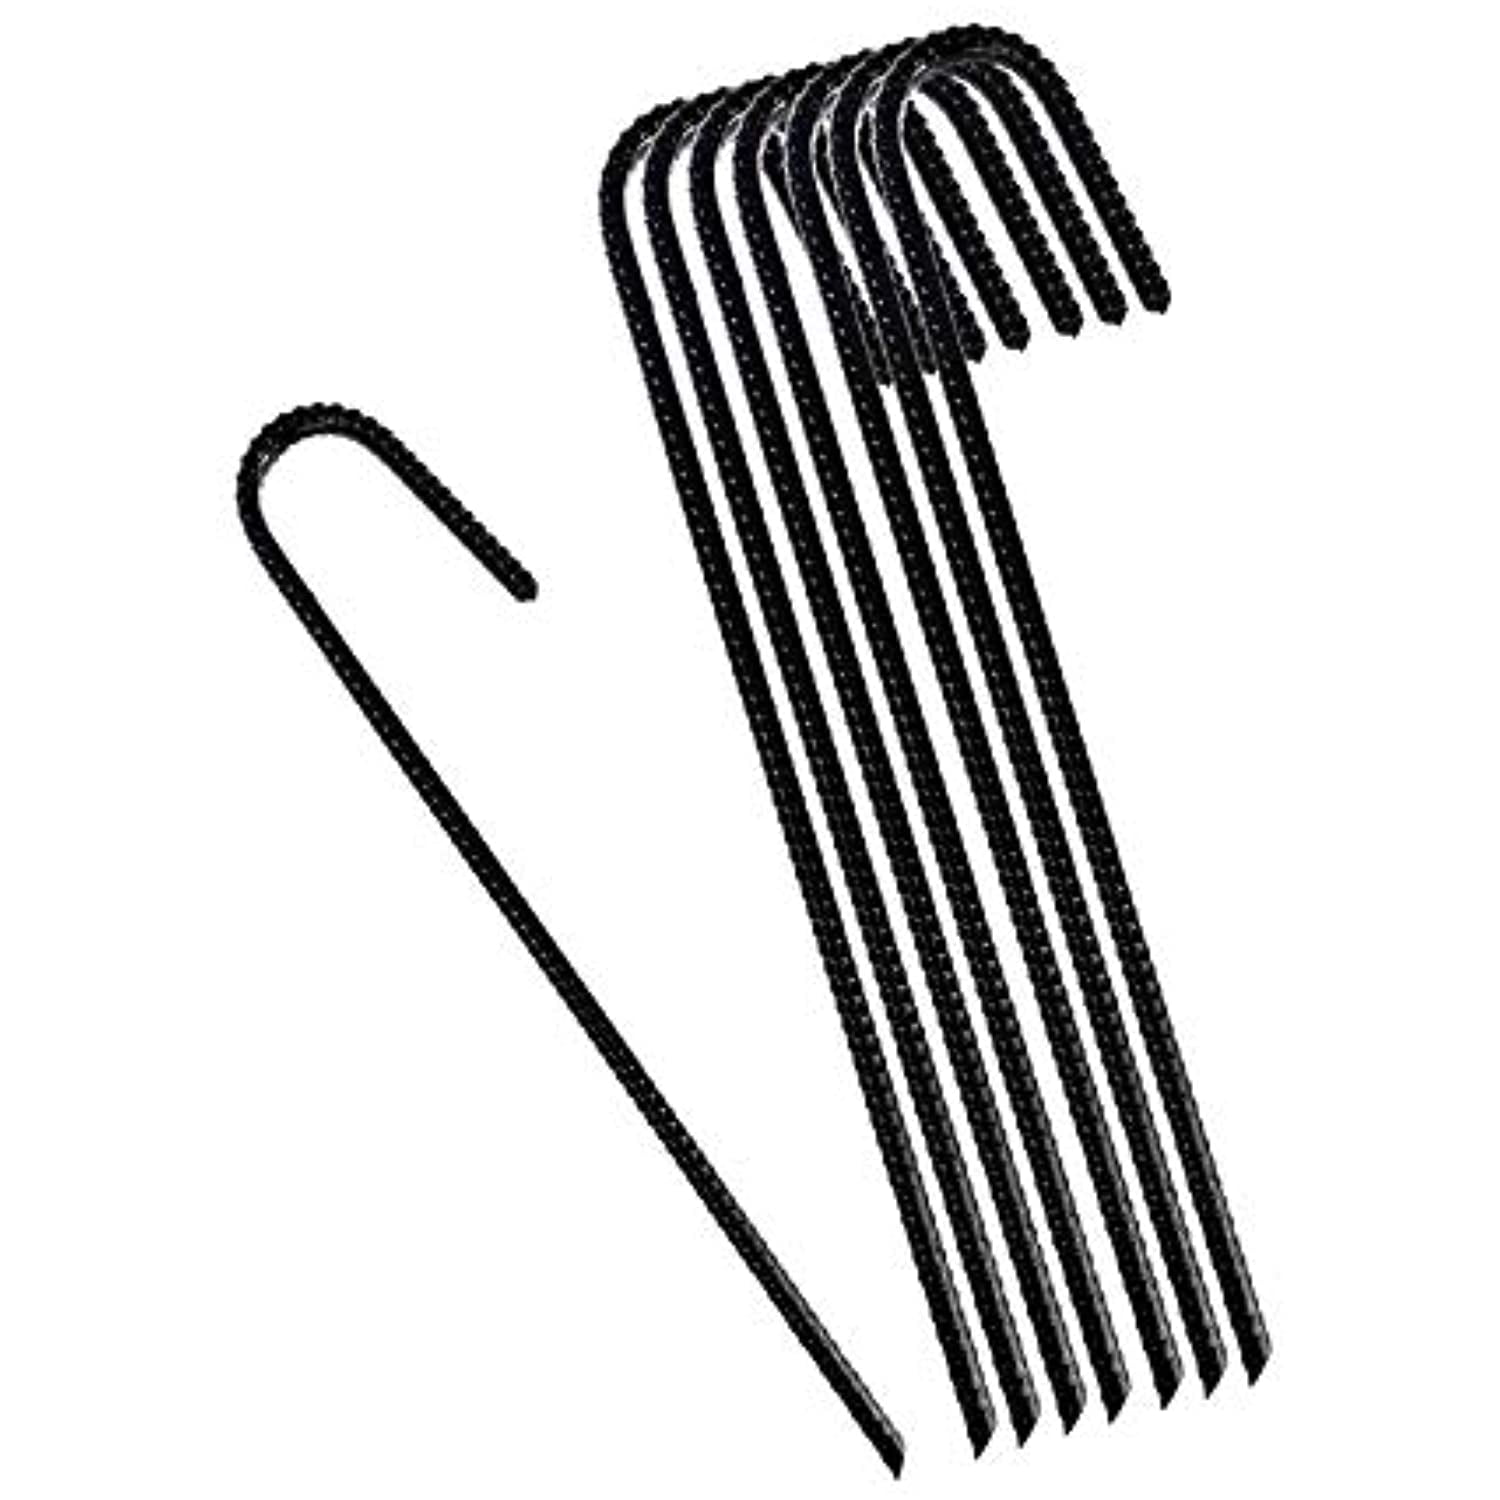 Urbalabs 16 inch Ground Anchor Rebar Stakes - Heavy Duty Steel Tent ...